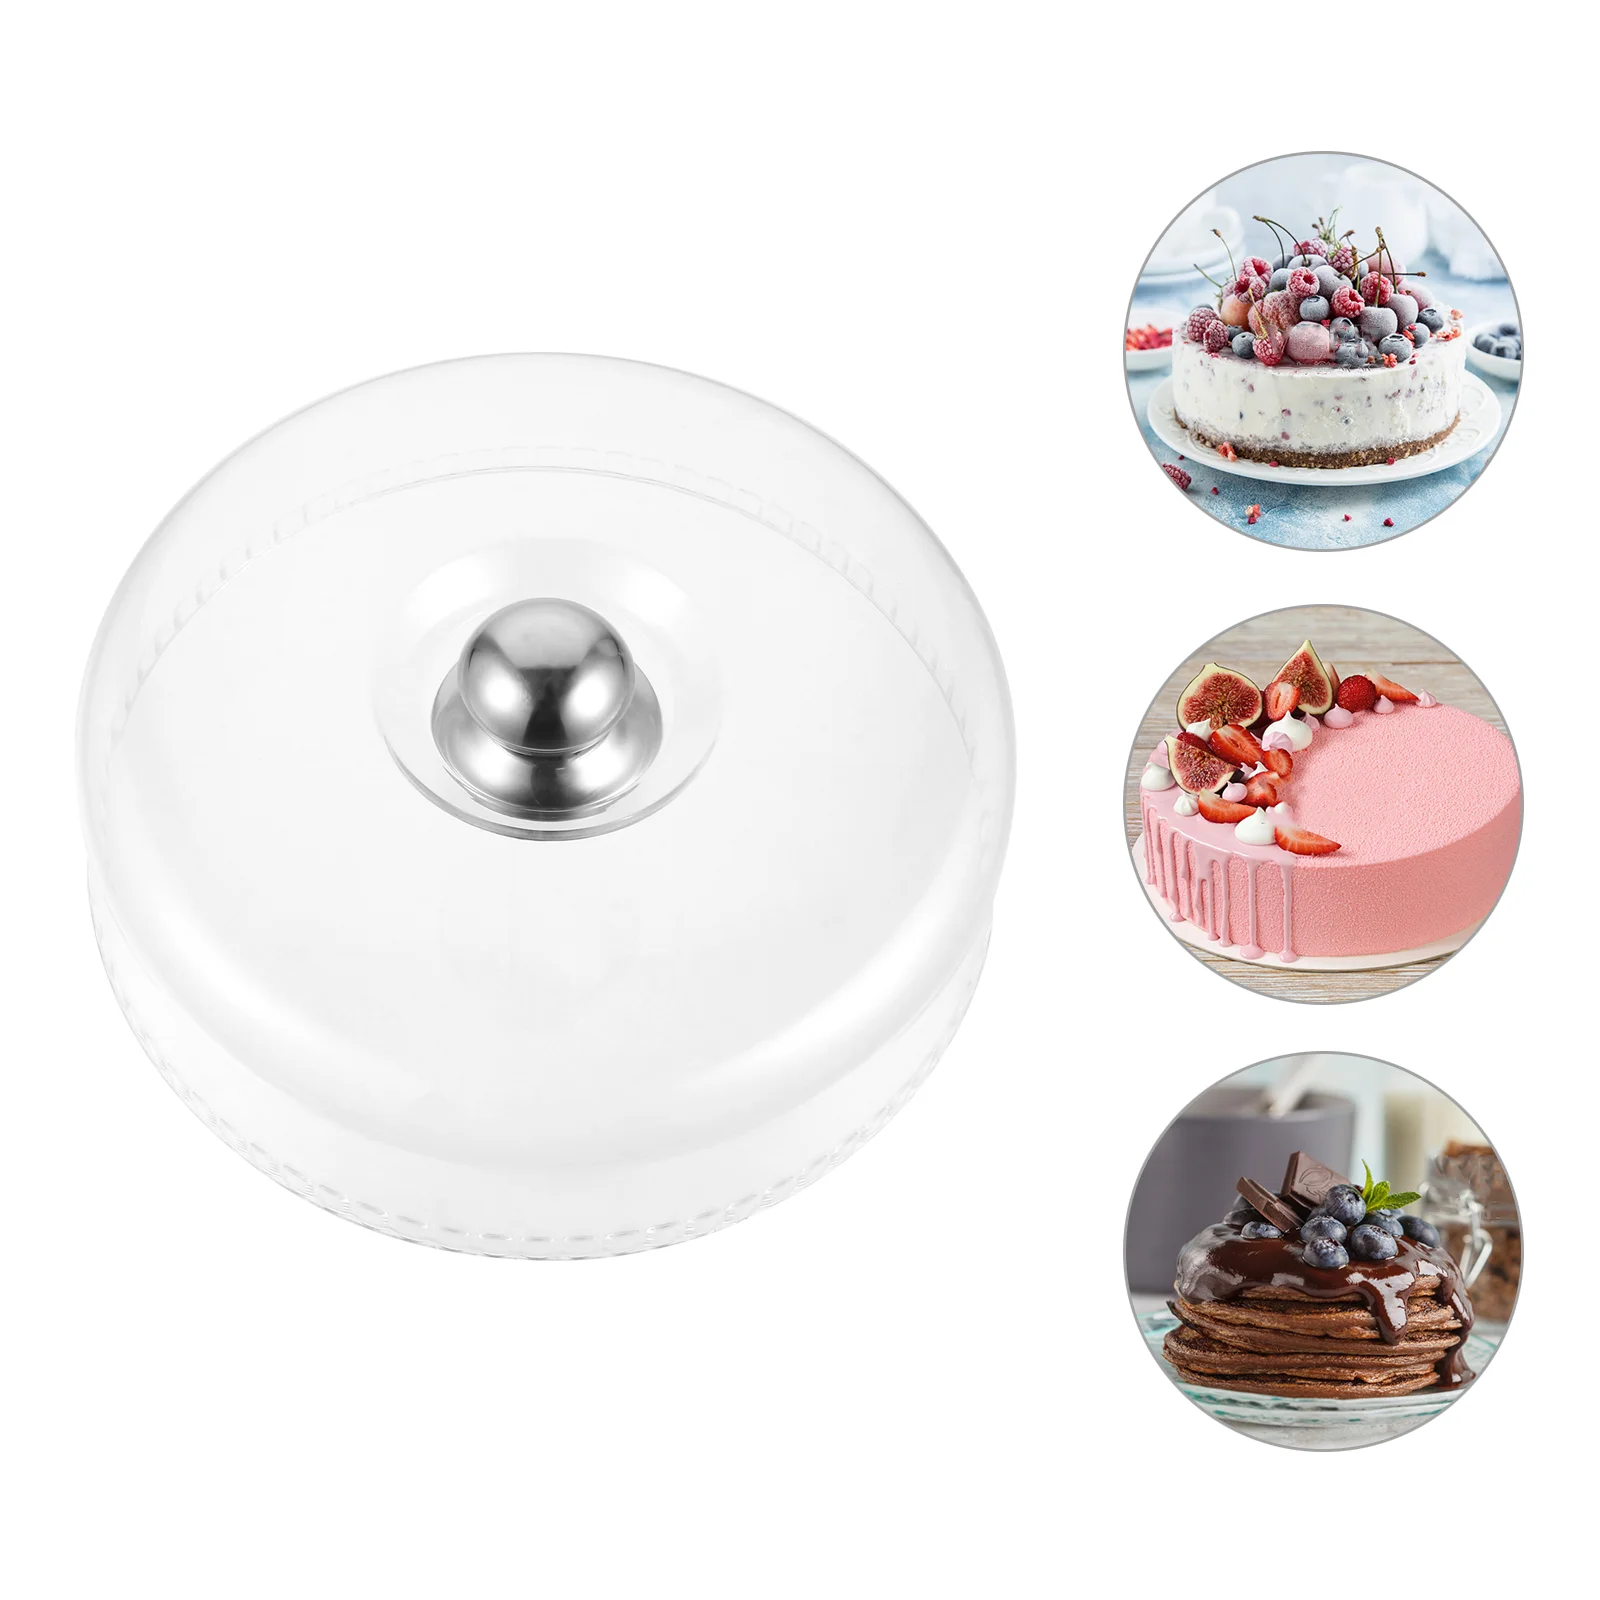 

Cover Food Dome Cake Plate Lid Pastry Dessert Melting Glass Tent Display Platter Dish Umbrella Clear Cheese Microwave Burger